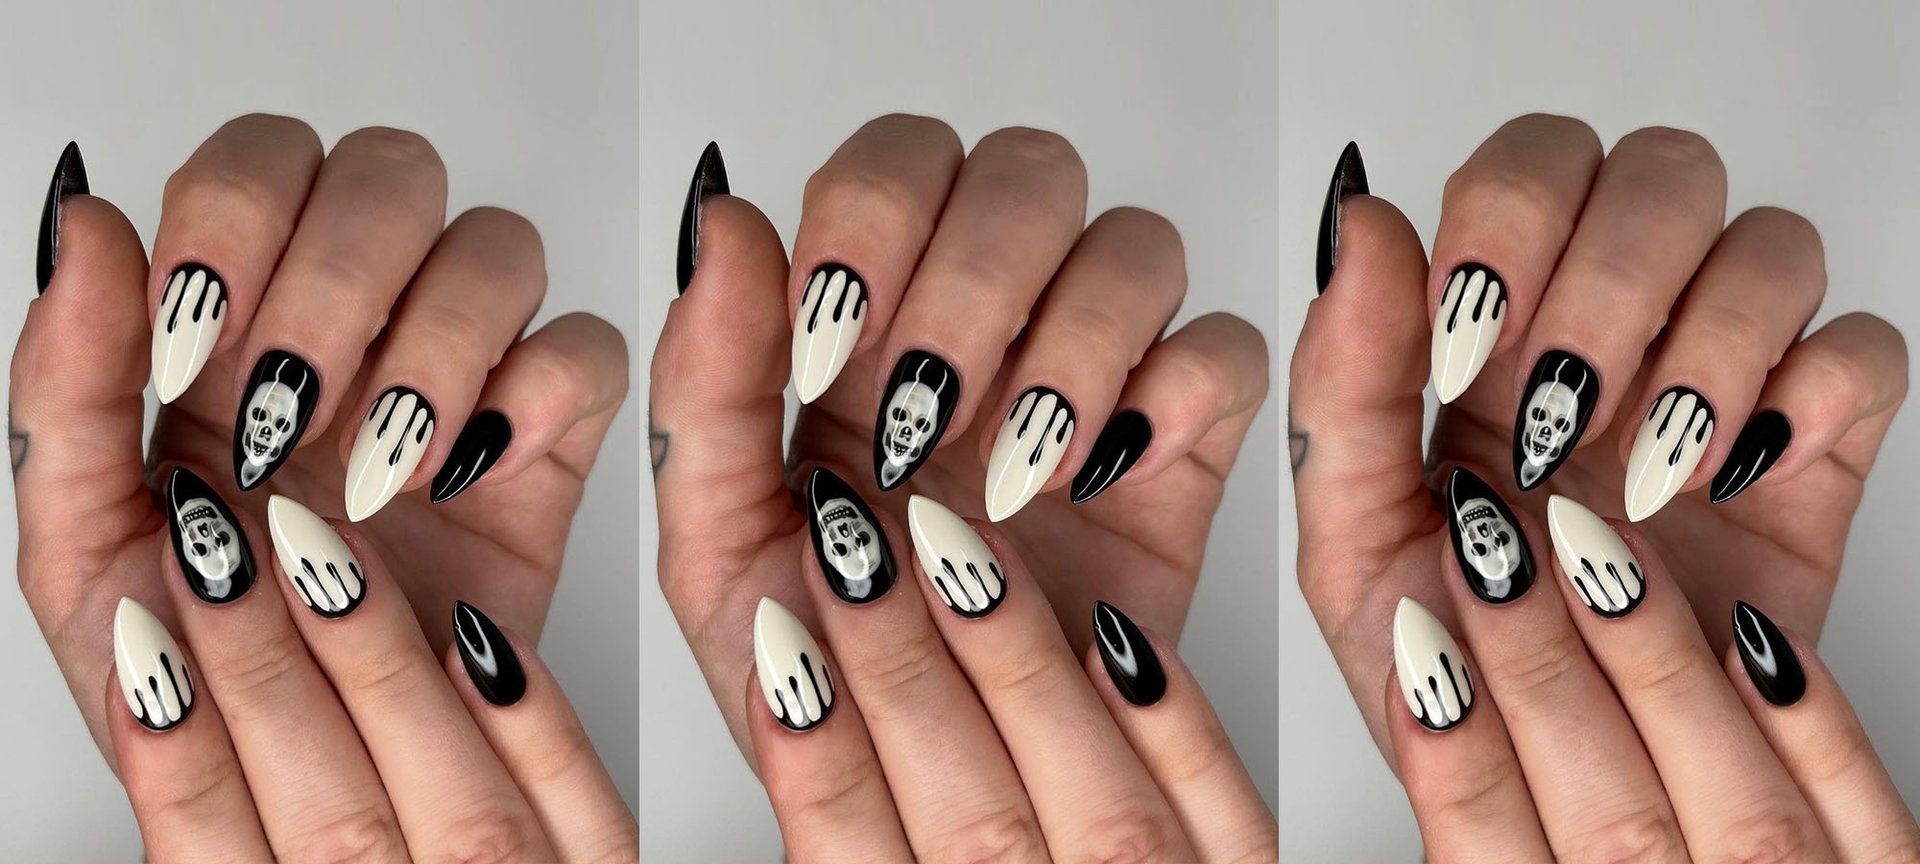 4. Cigarette Themed Nail Art - wide 5